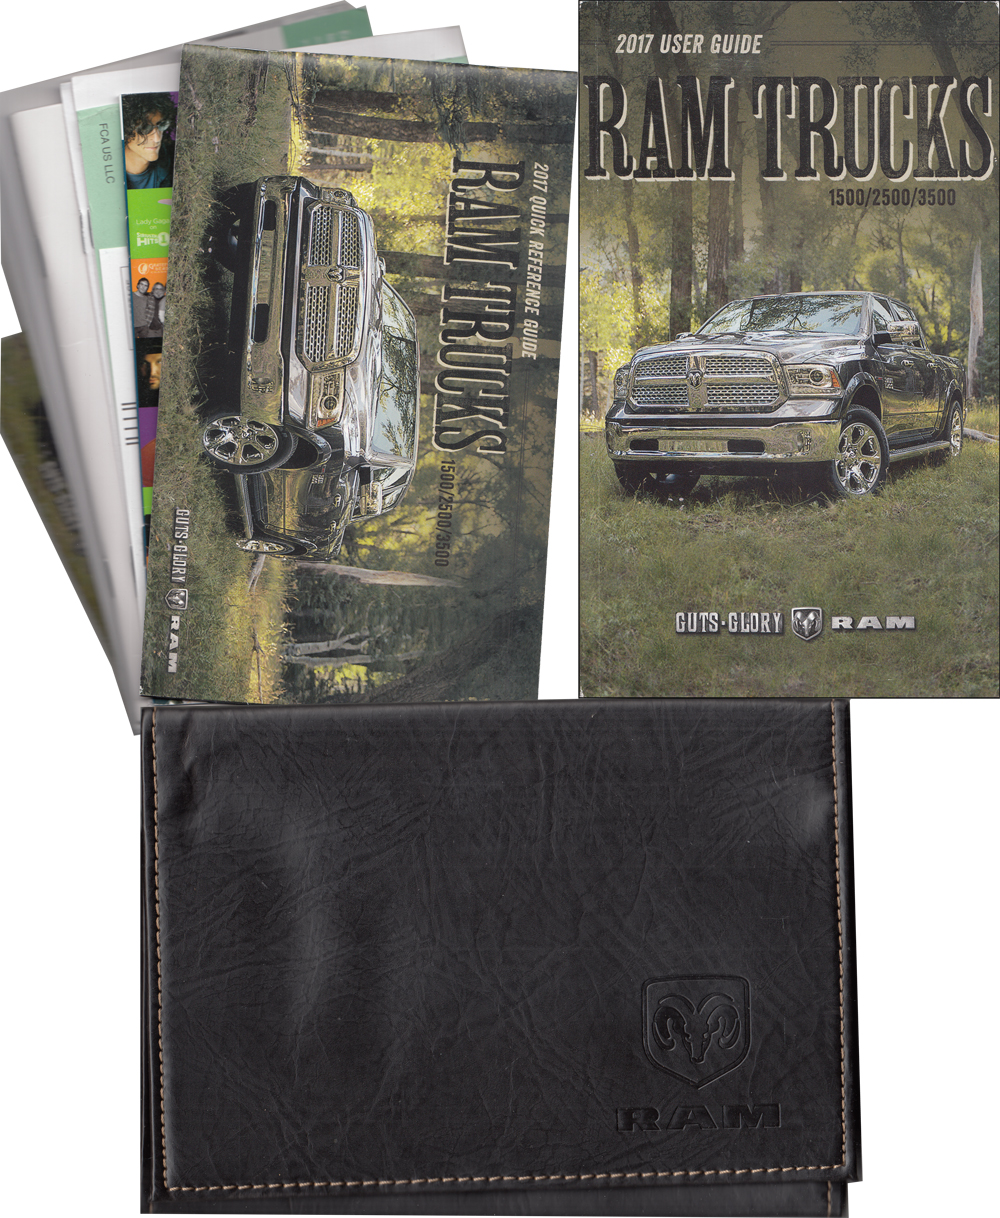 2017 Ram Pickup Truck User Guide Owner's Manual Package with Case